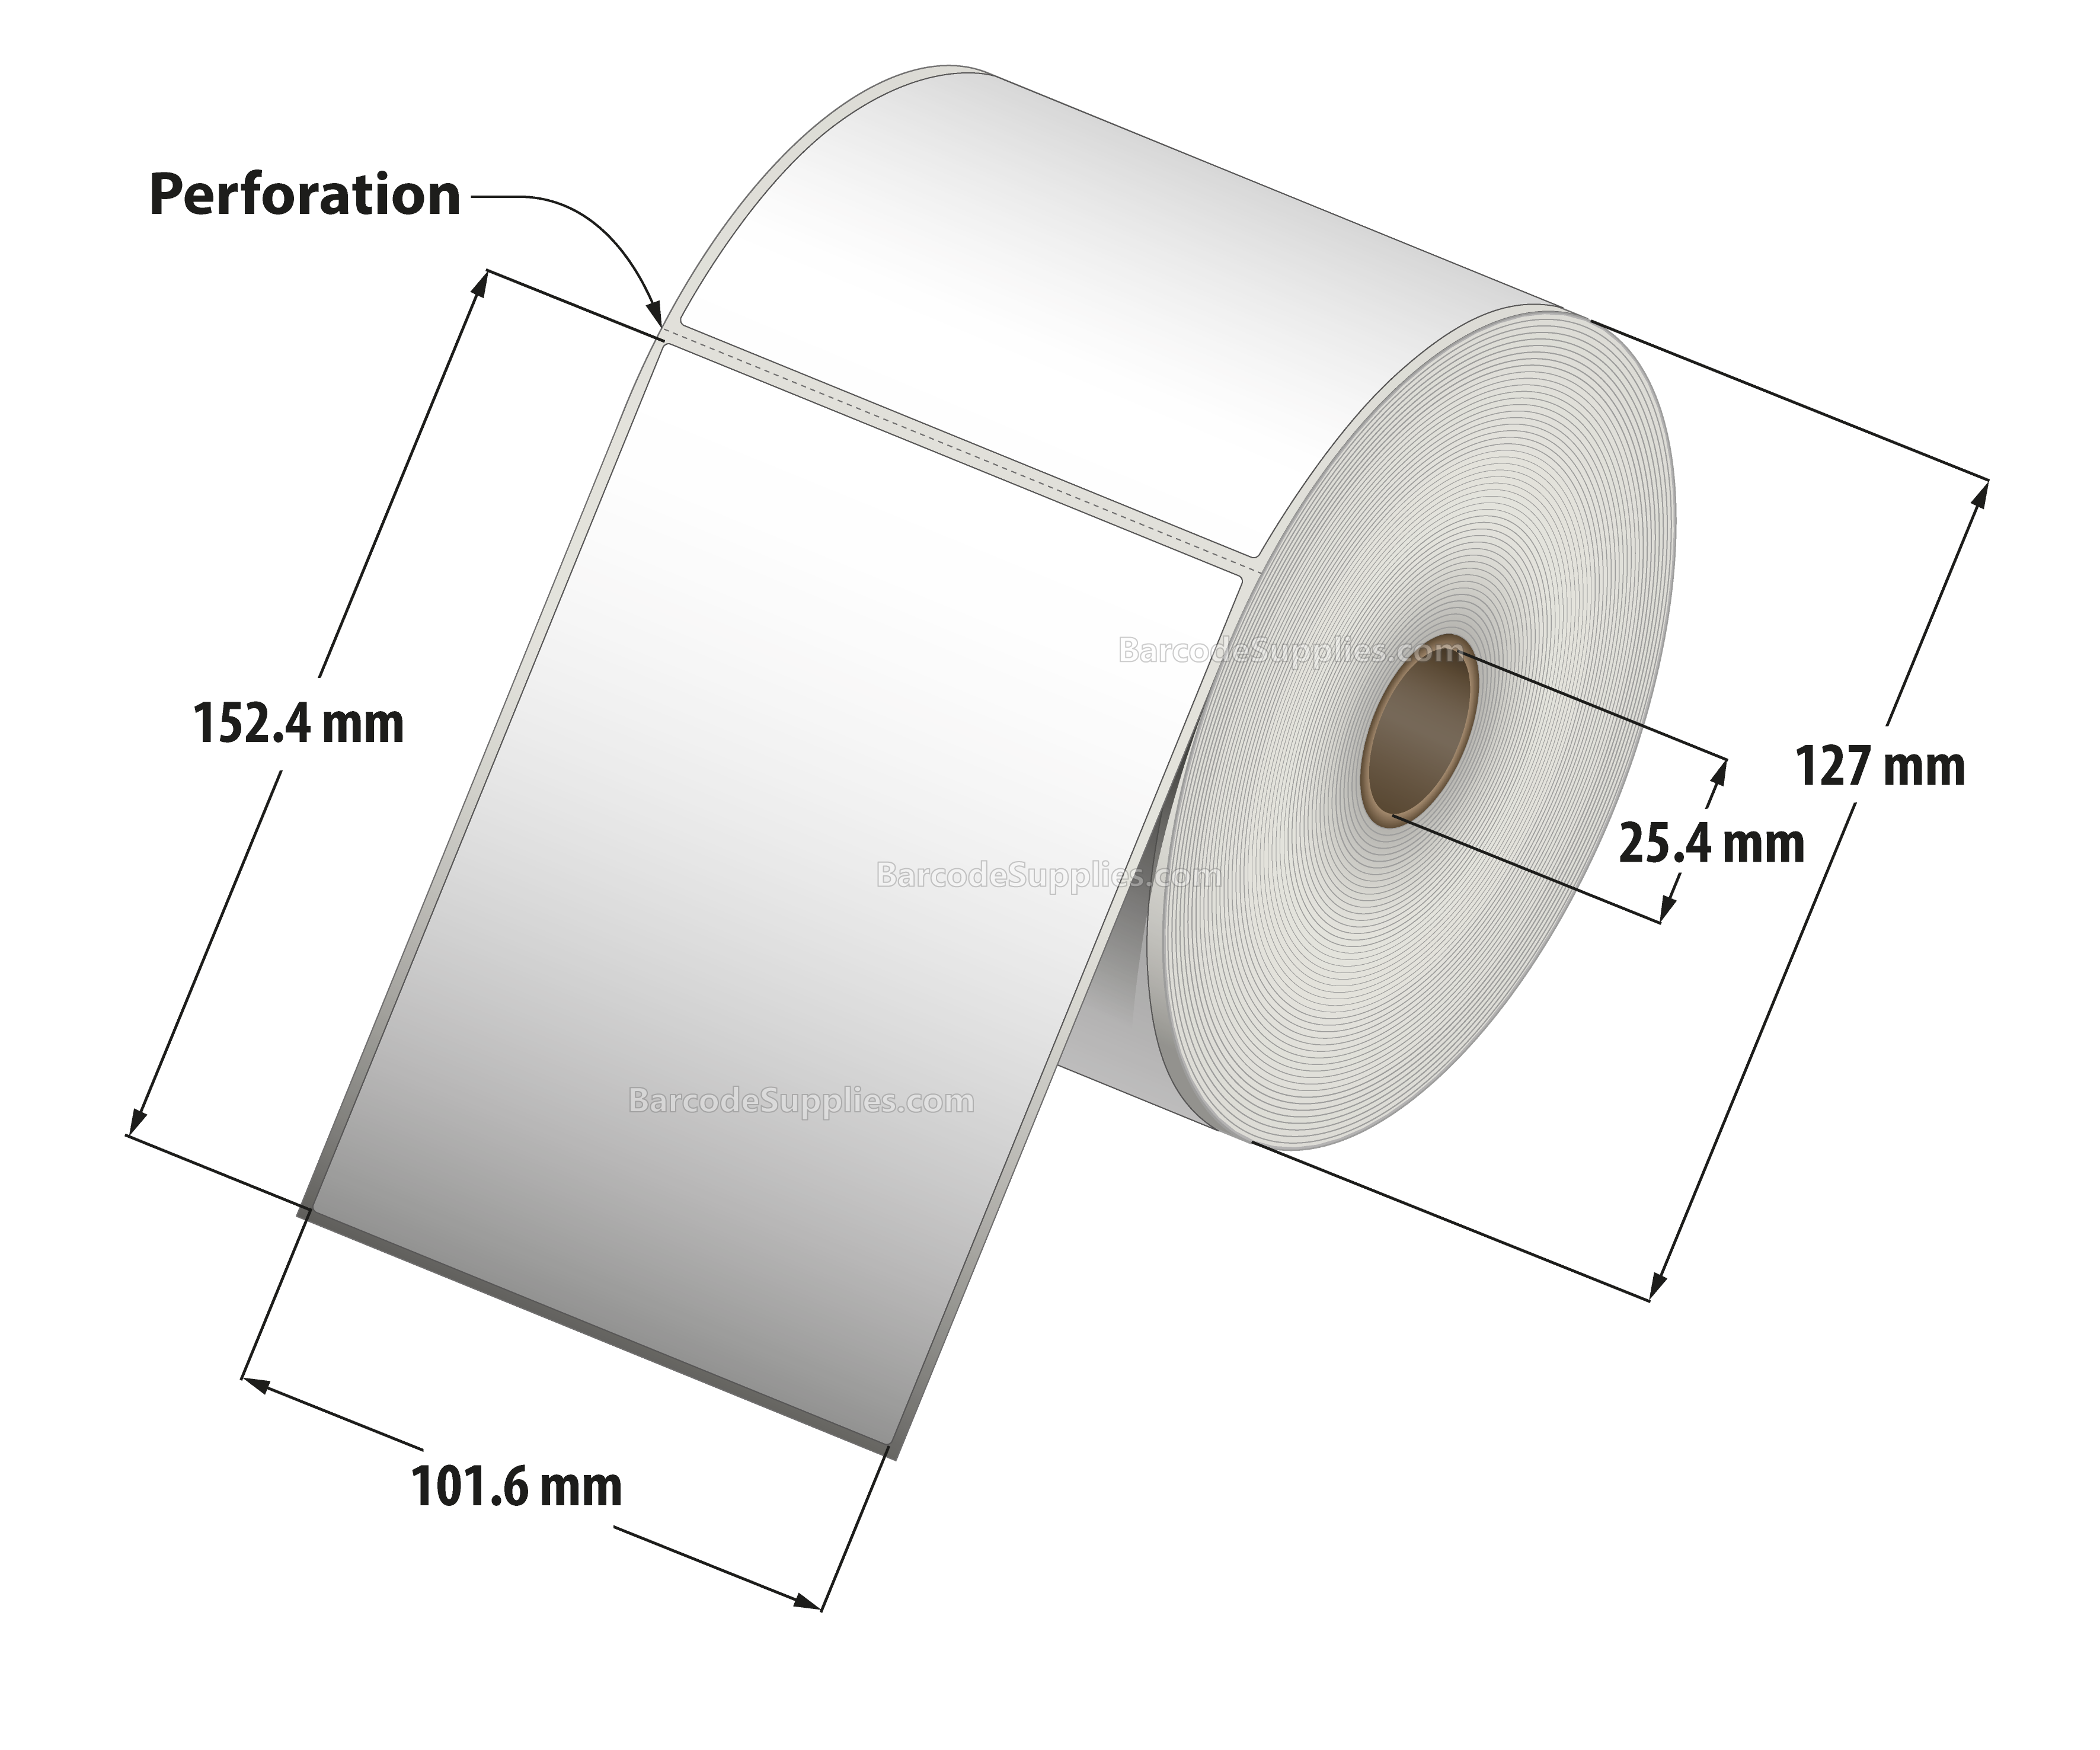 4 x 6 Thermal Transfer White Labels With Permanent Adhesive - Perforated - 460 Labels Per Roll - Carton Of 12 Rolls - 5520 Labels Total - MPN: RT-4-6-460-1 - BarcodeSource, Inc.